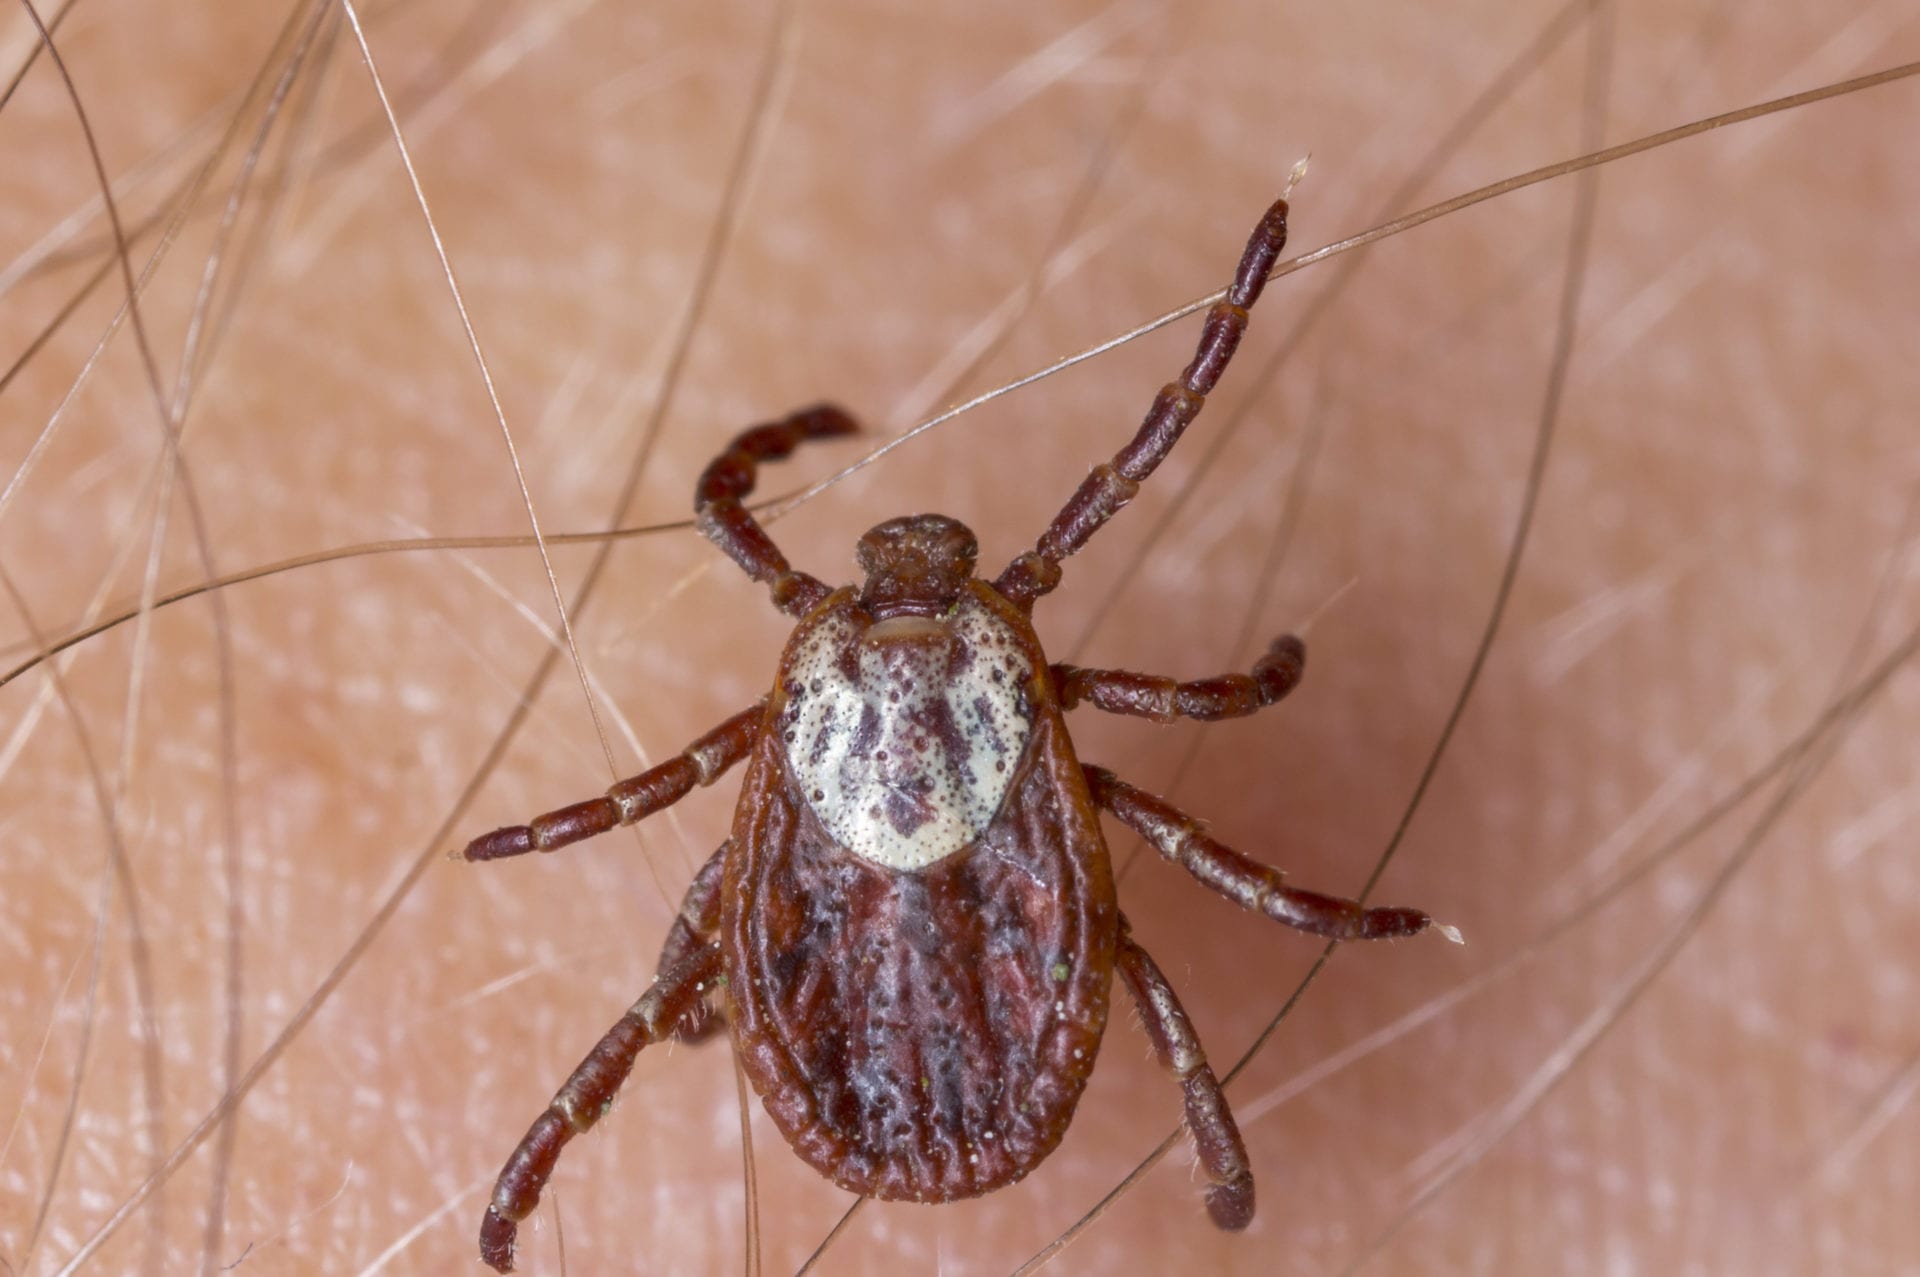 American Dog Tick on a person's skin.